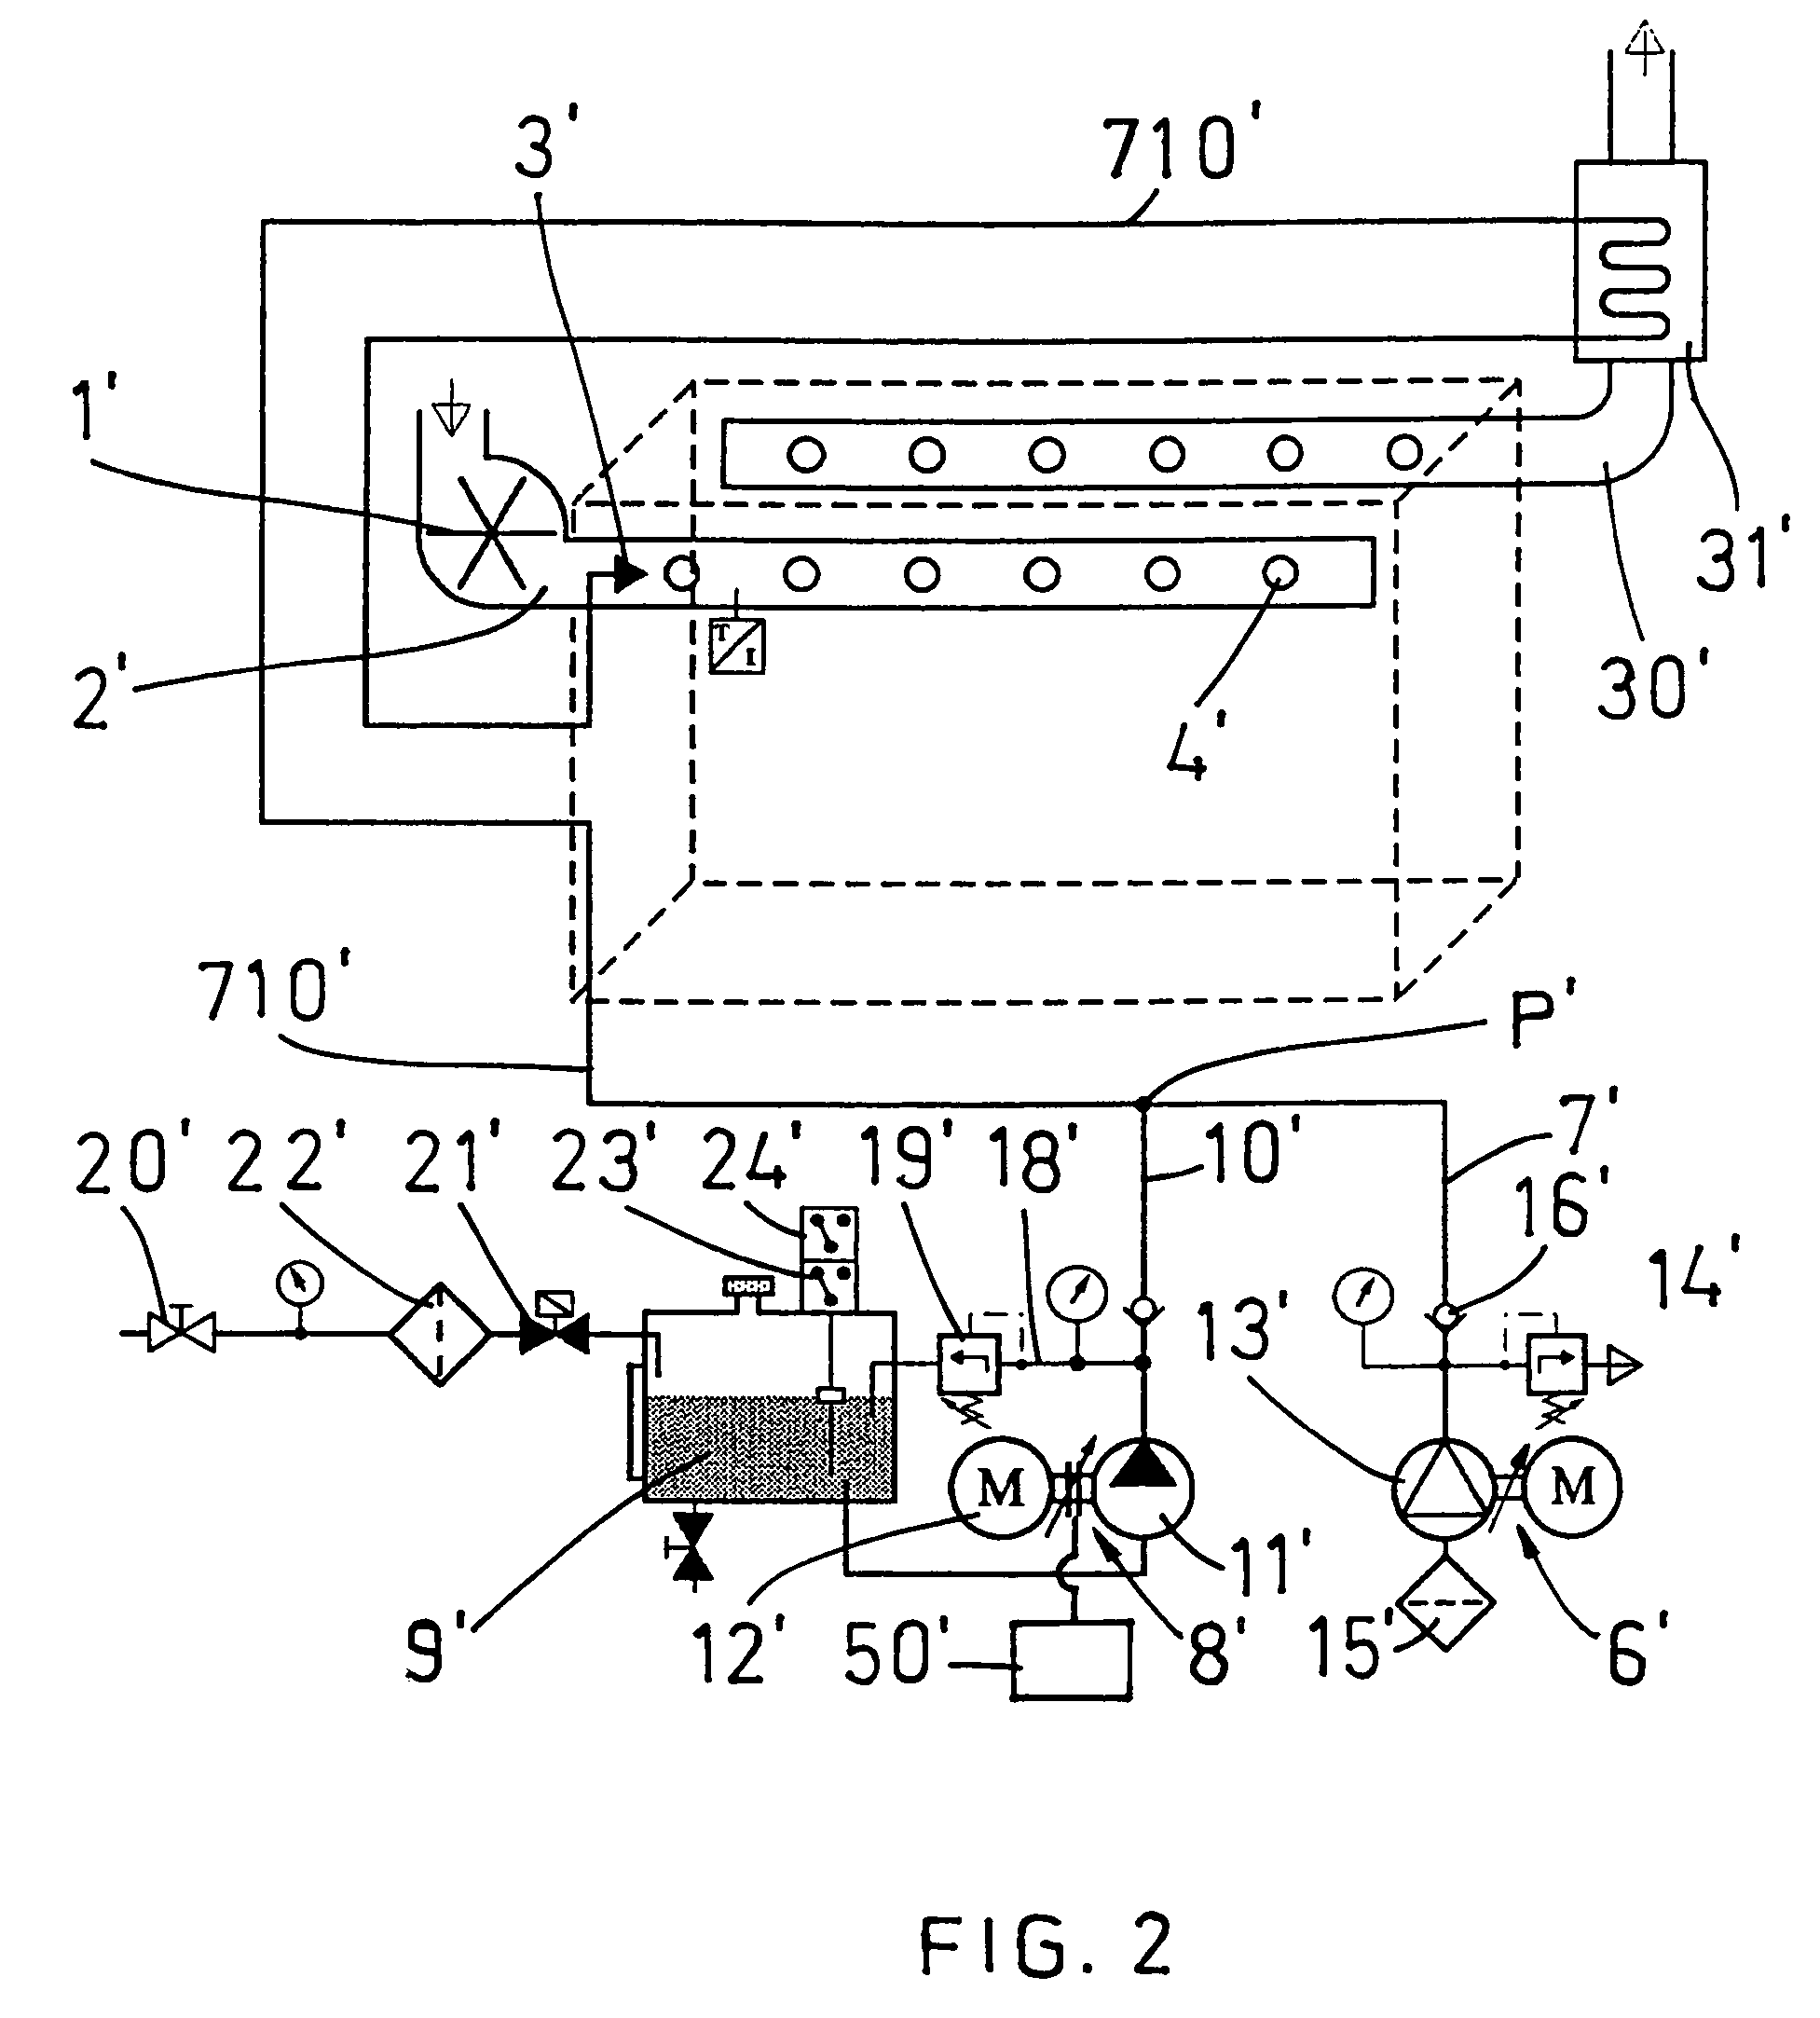 Method and apparatus for reducing combustion engine emissions